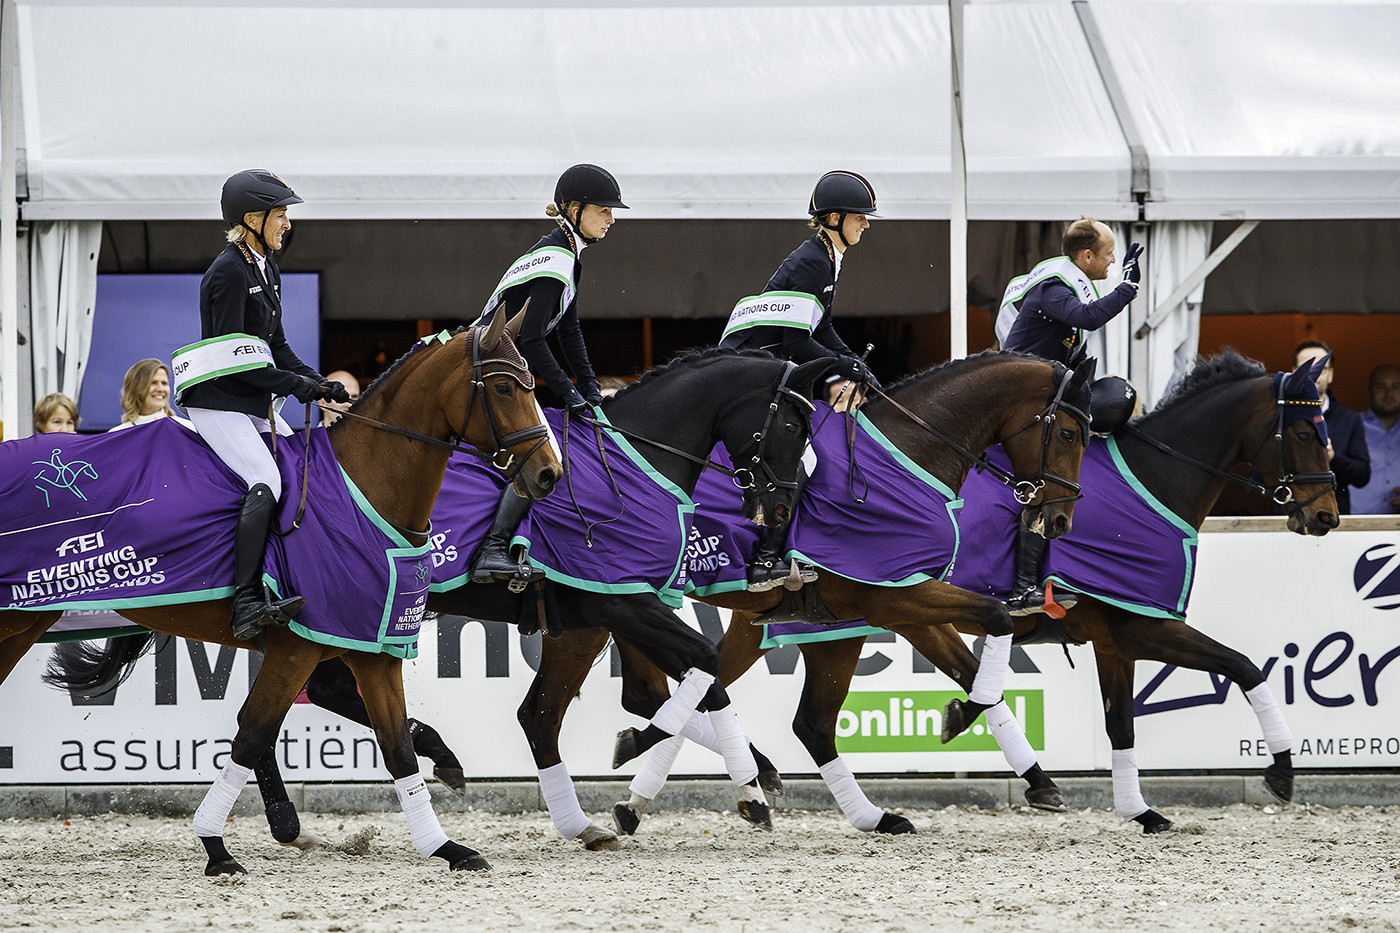 Sweden, Germany and Switzerland celebrate at FEI Eventing Nations Cup